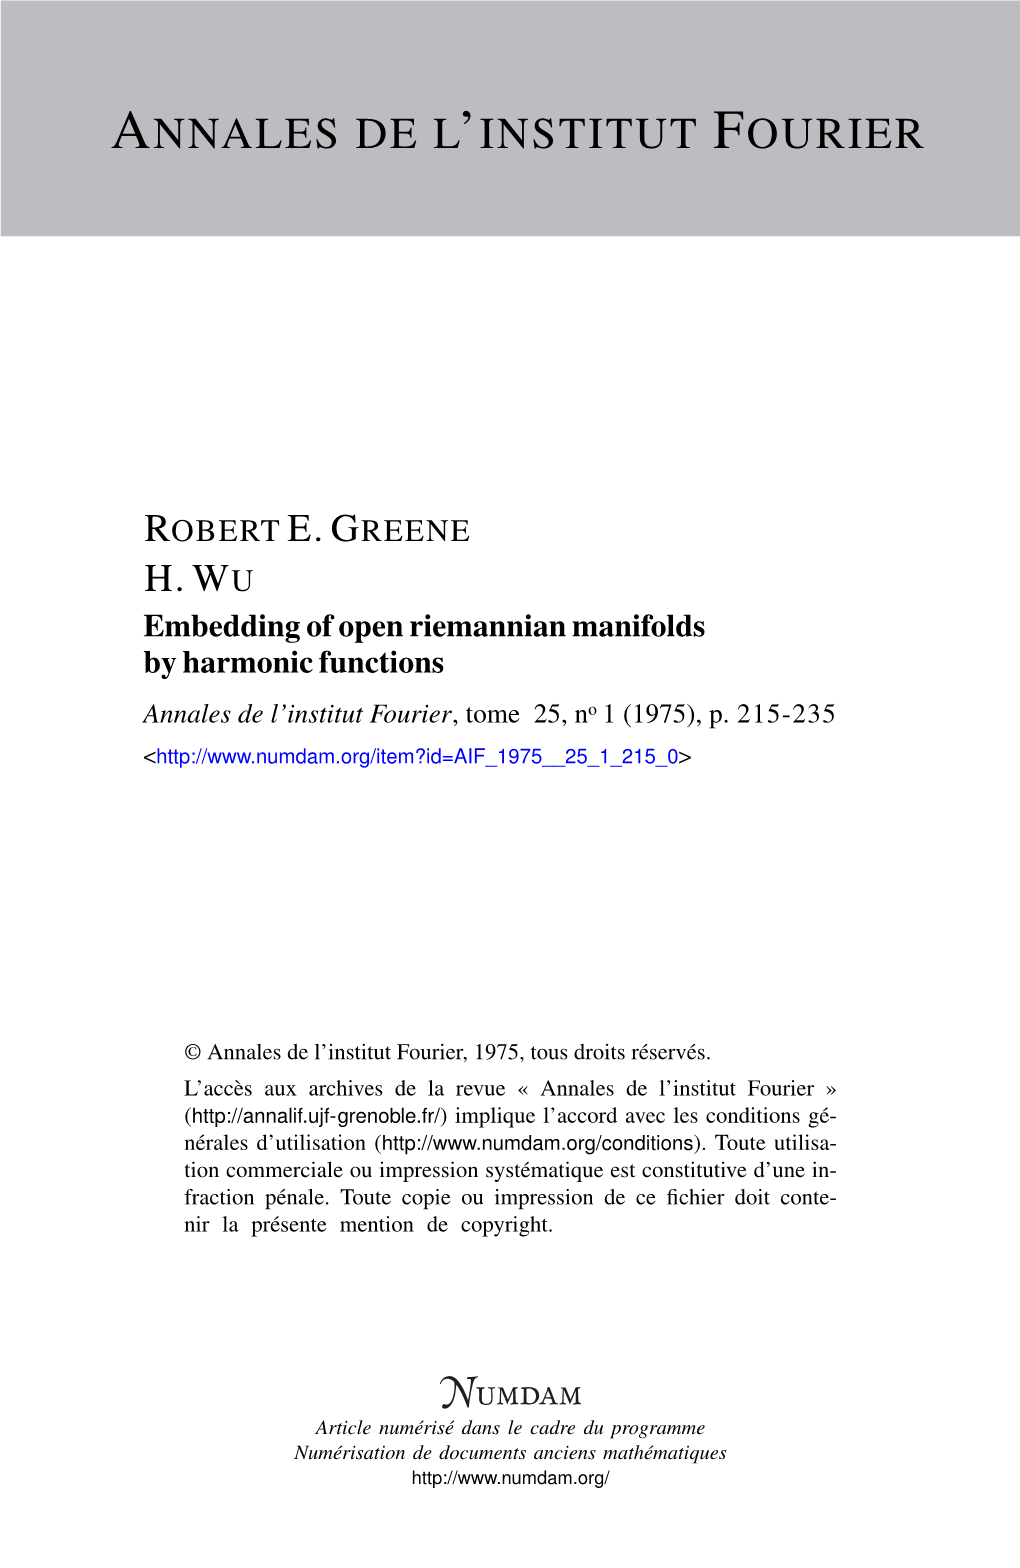 Embedding of Open Riemannian Manifolds by Harmonic Functions Annales De L’Institut Fourier, Tome 25, No 1 (1975), P